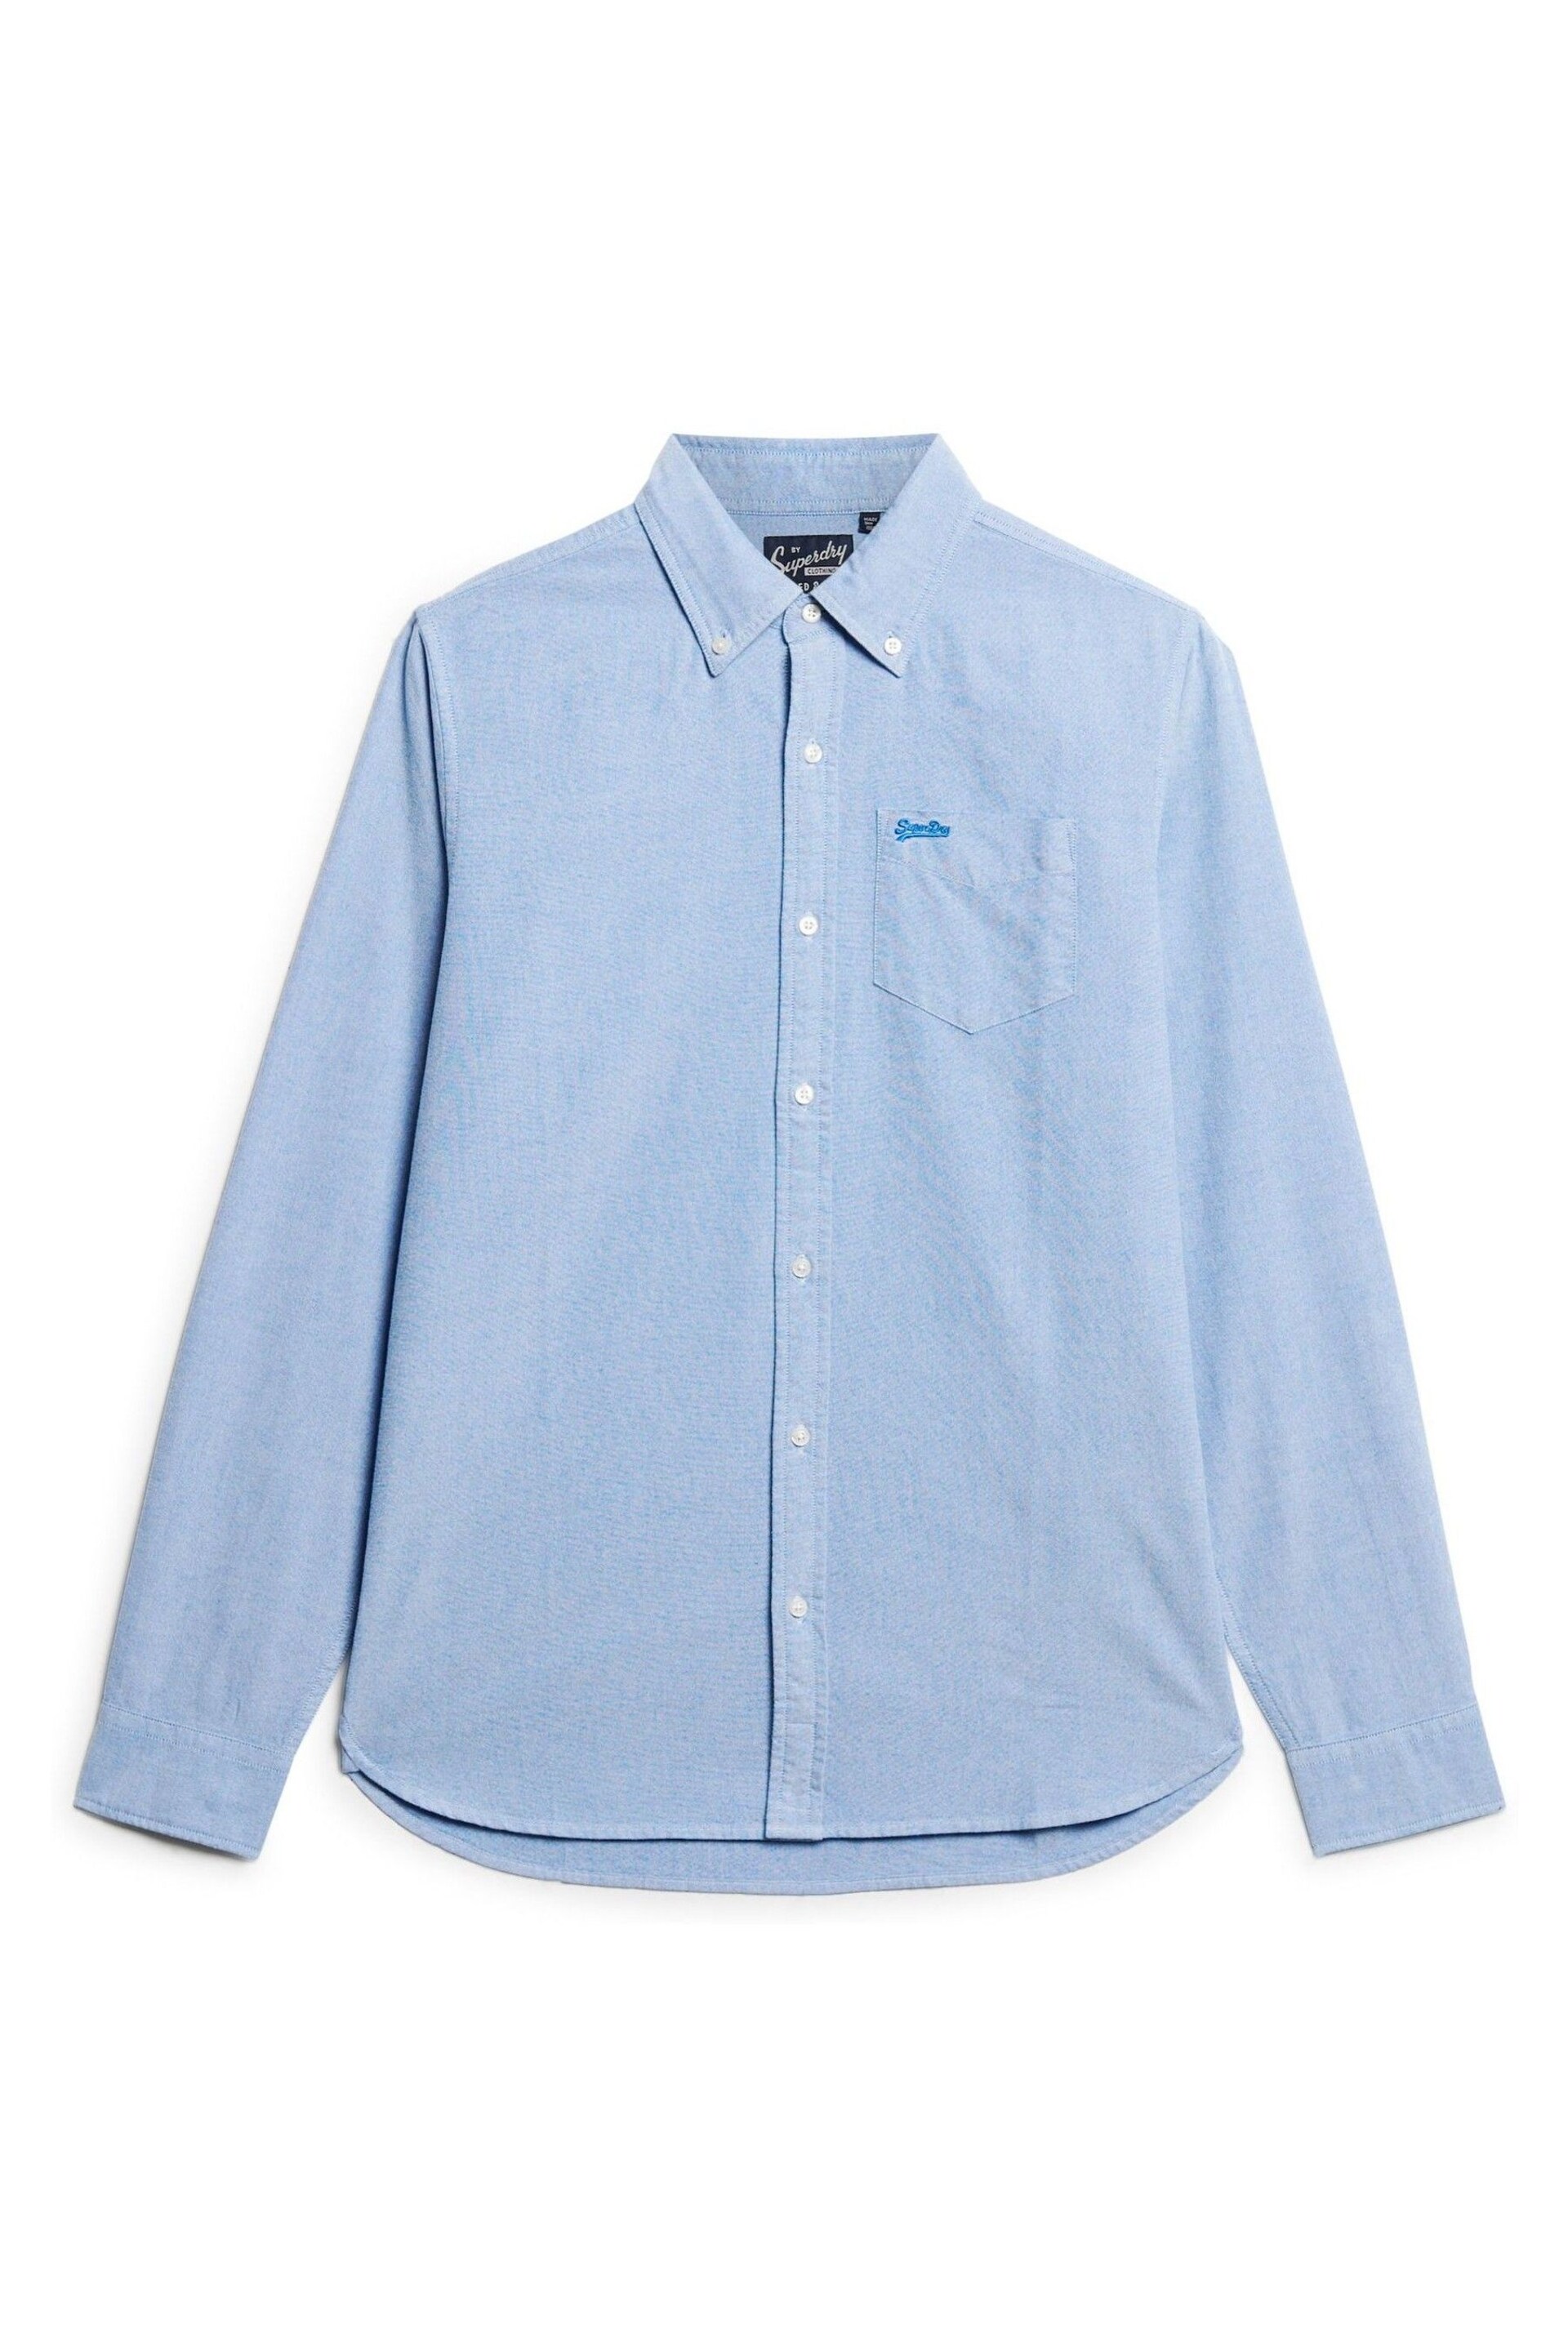 Superdry Royal Blue Cotton Long Sleeved Oxford Shirt - Image 3 of 5